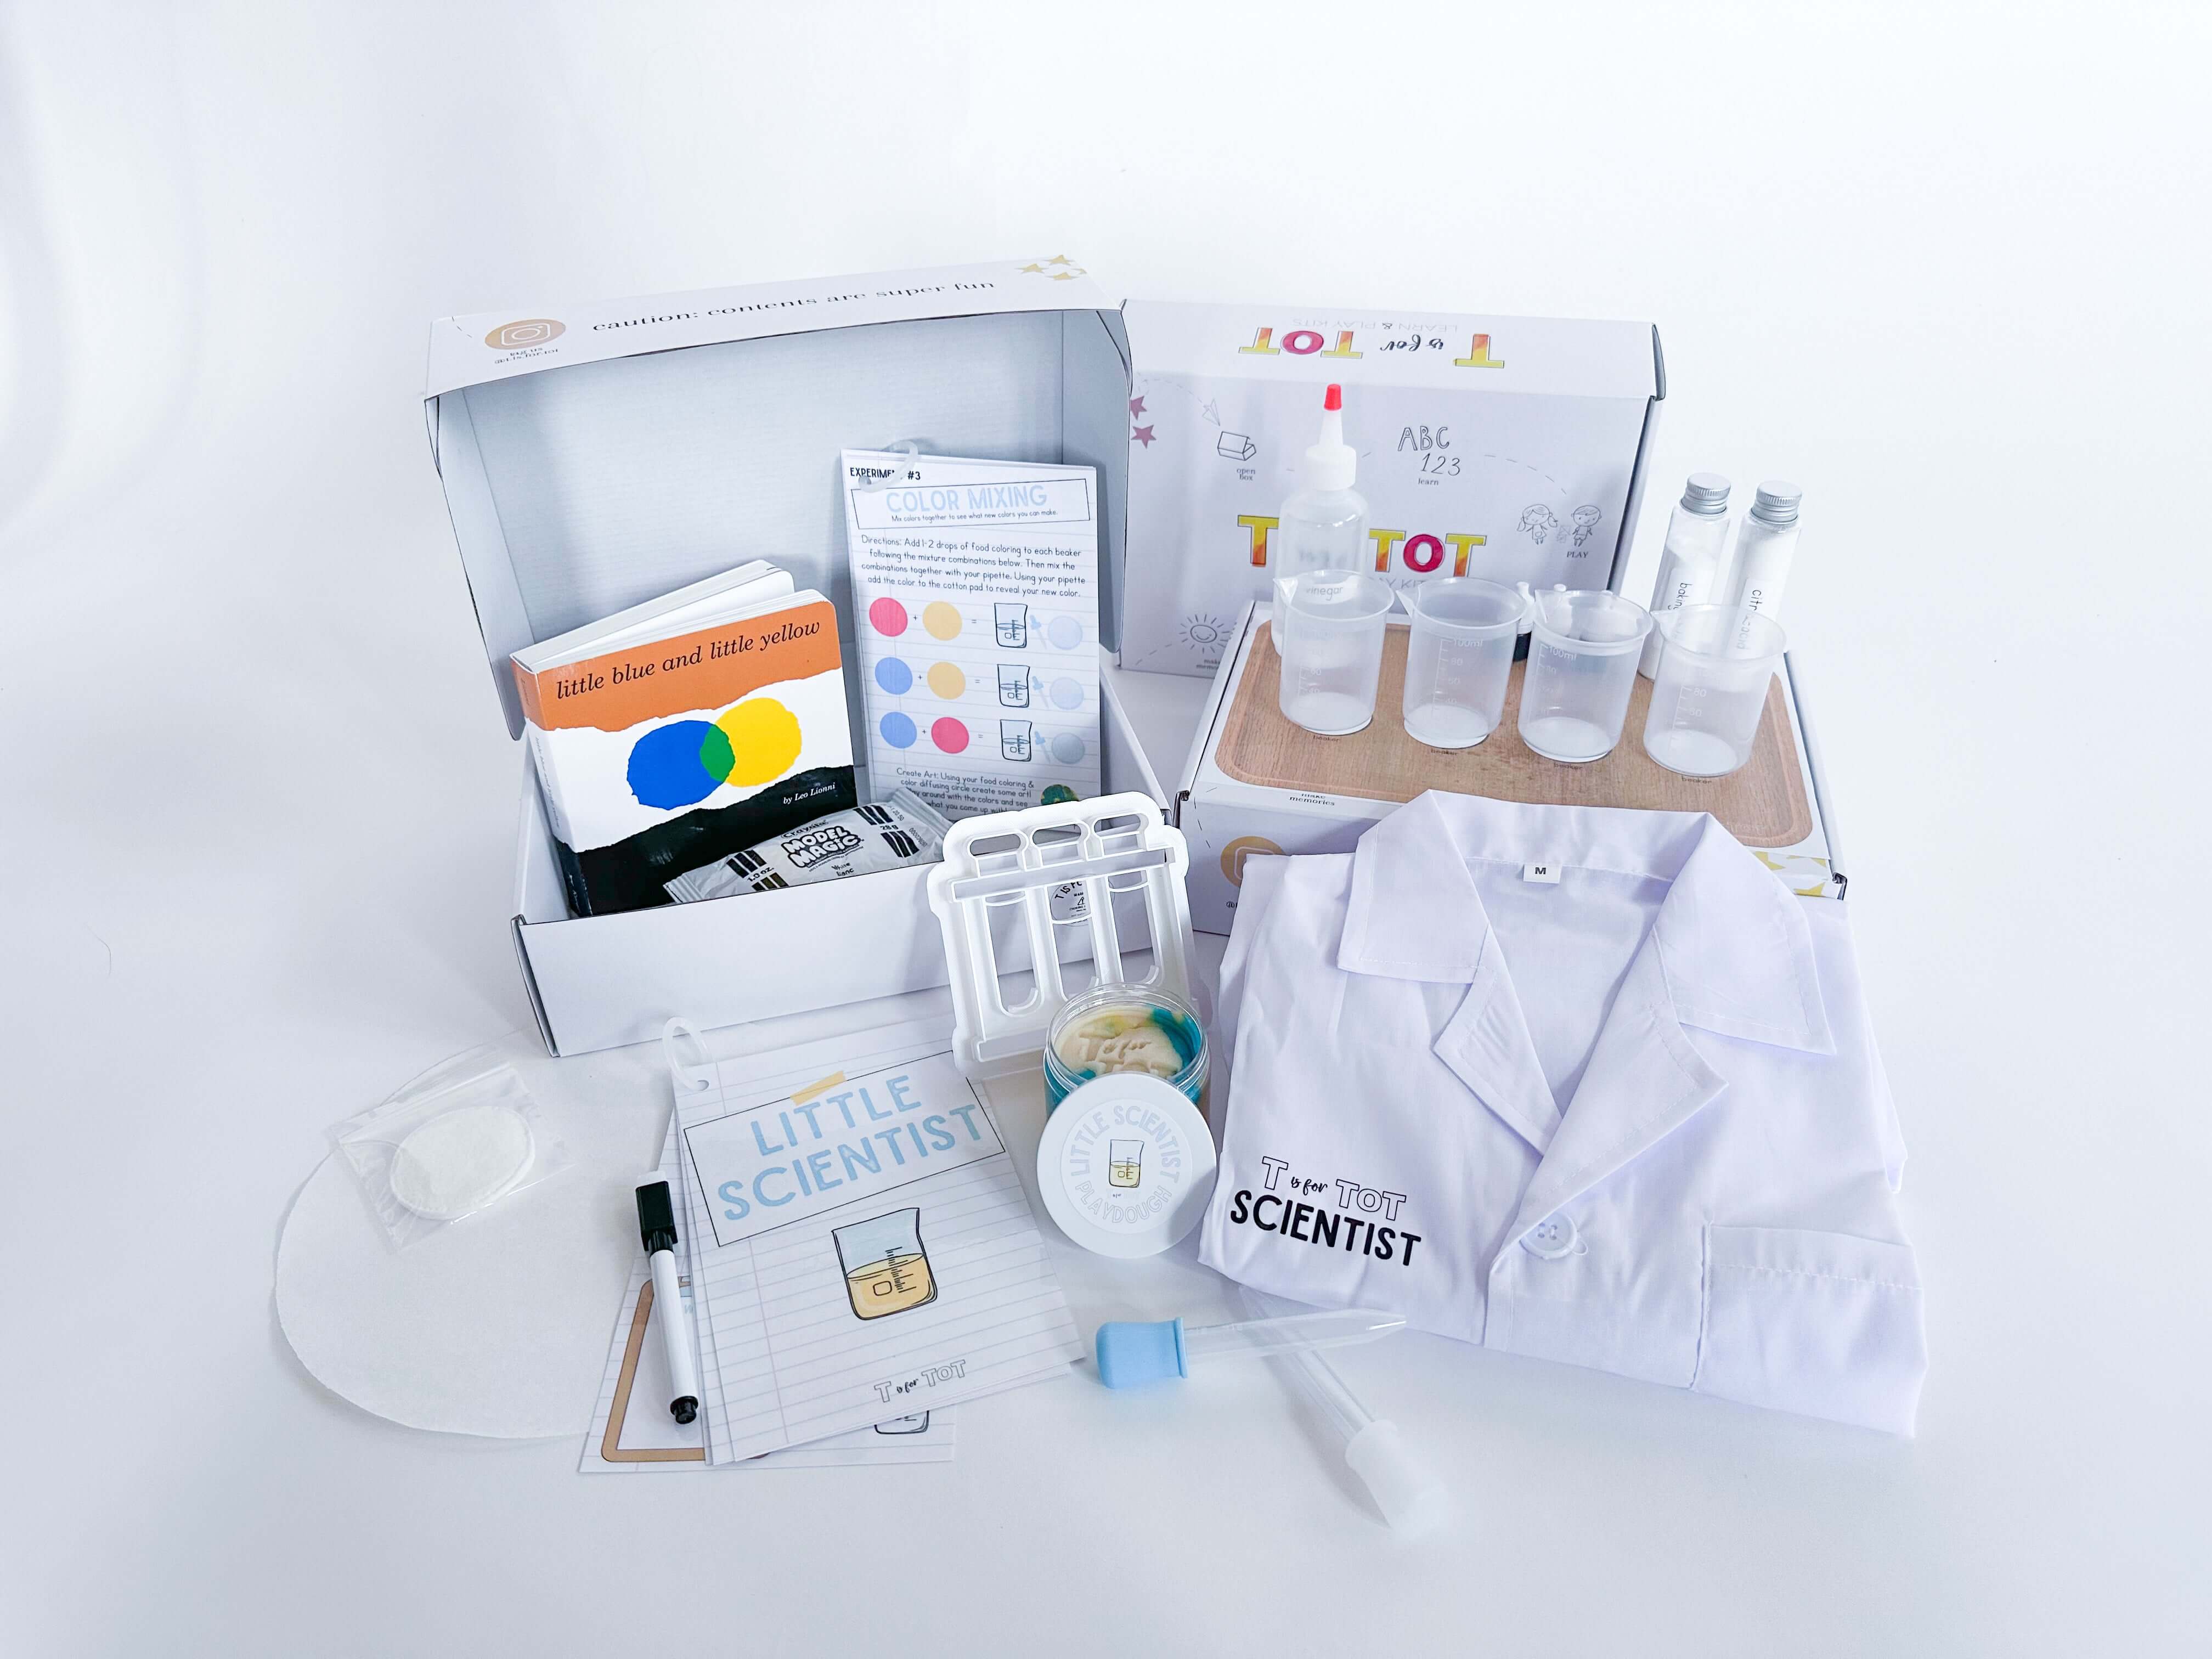 Little Scientist play and learn kit for kids with experiments, beakers, pipettes, food coloring, and other science tools. Includes a lab coat, experiment guide with dry erase marker, and art supplies for creative activities. Comes with 